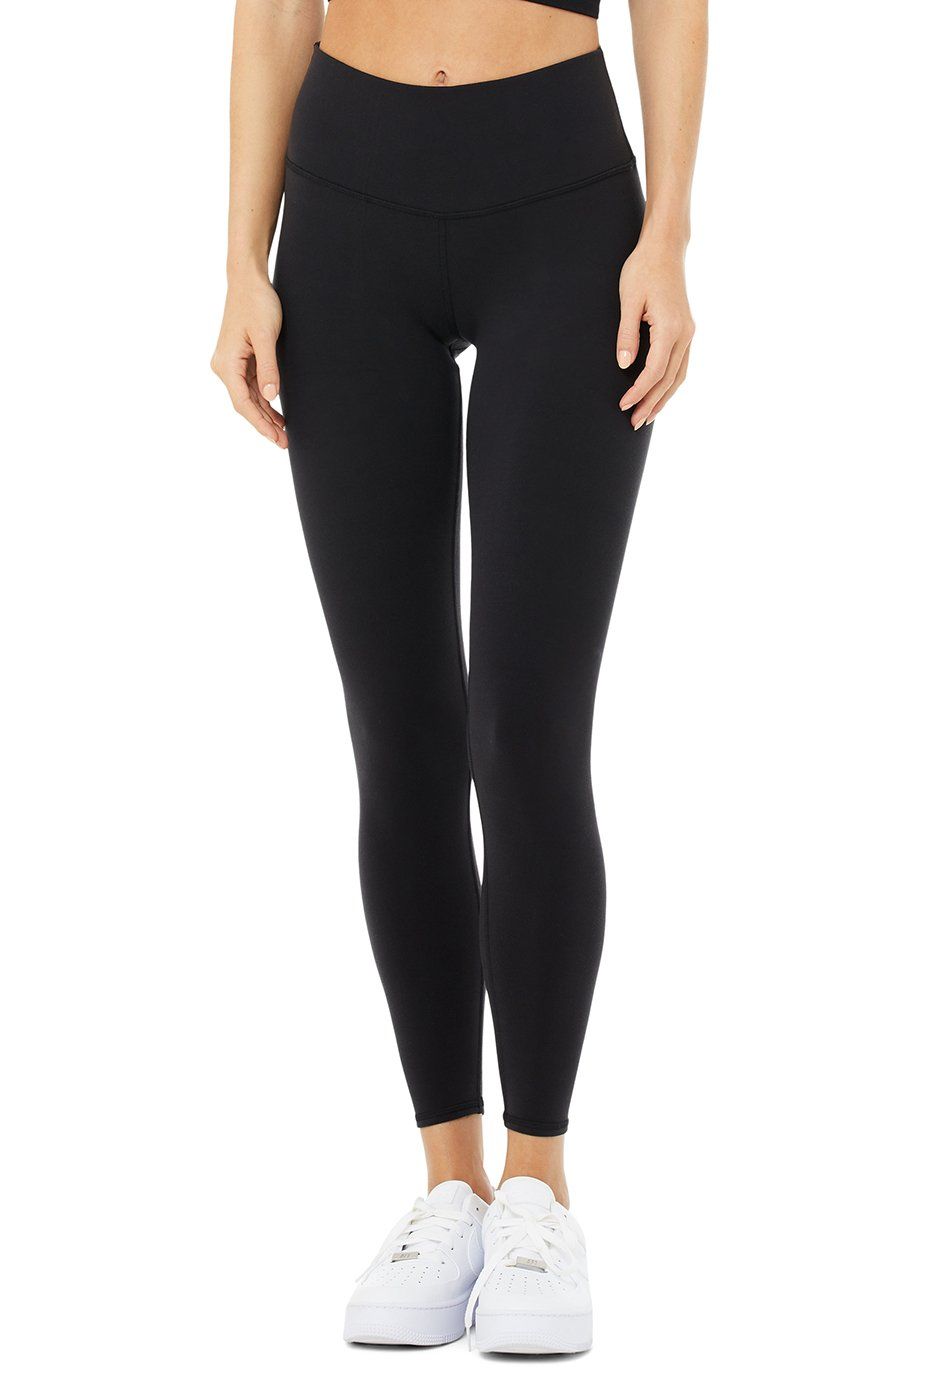 1pc Women's Black High Waist Tight Leggings, Nine-point Pants, Suitable For  Daily Use In Spring And Autumn